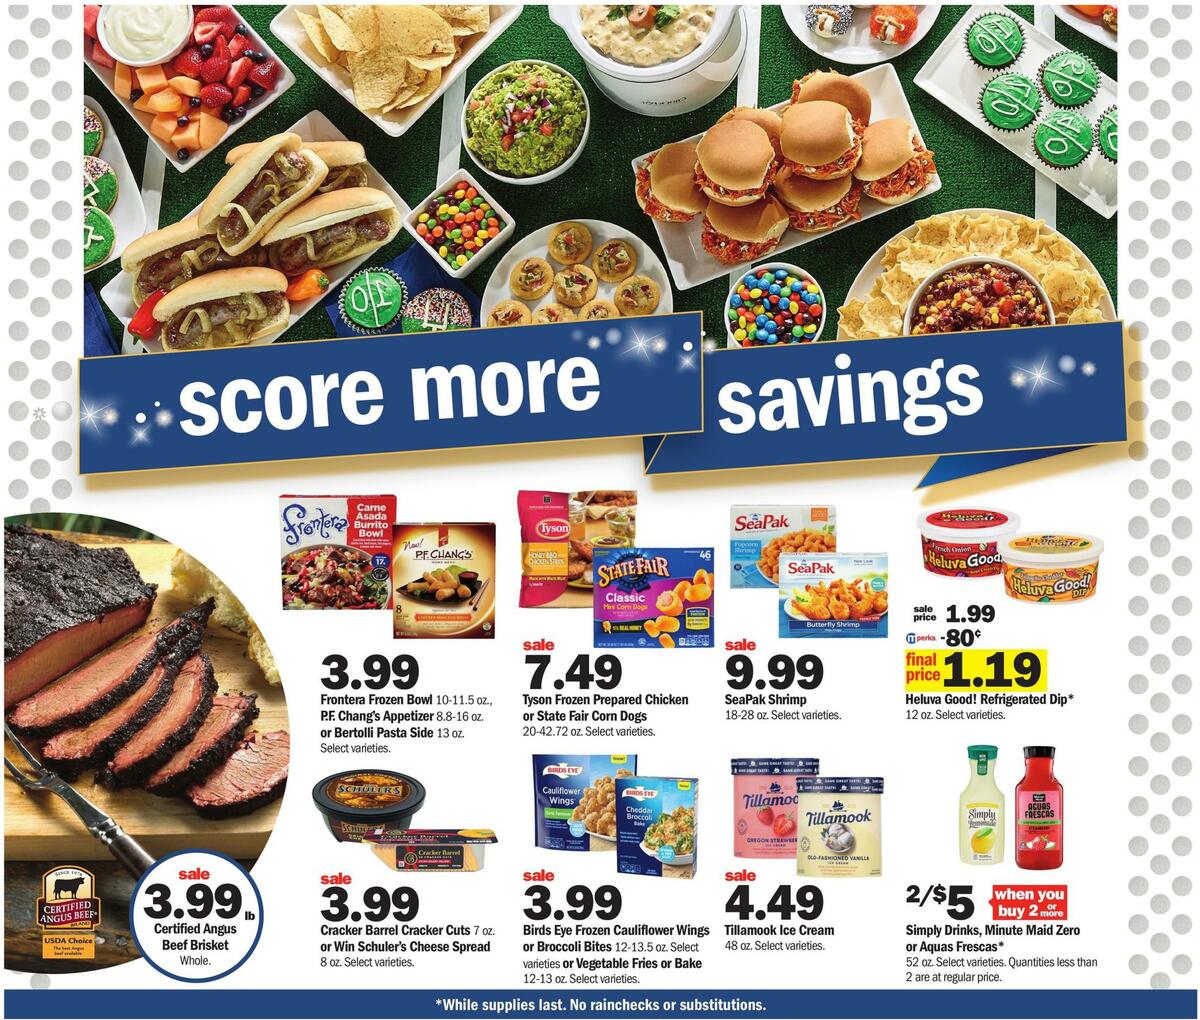 Meijer Superbowl Weekly Ad from January 29